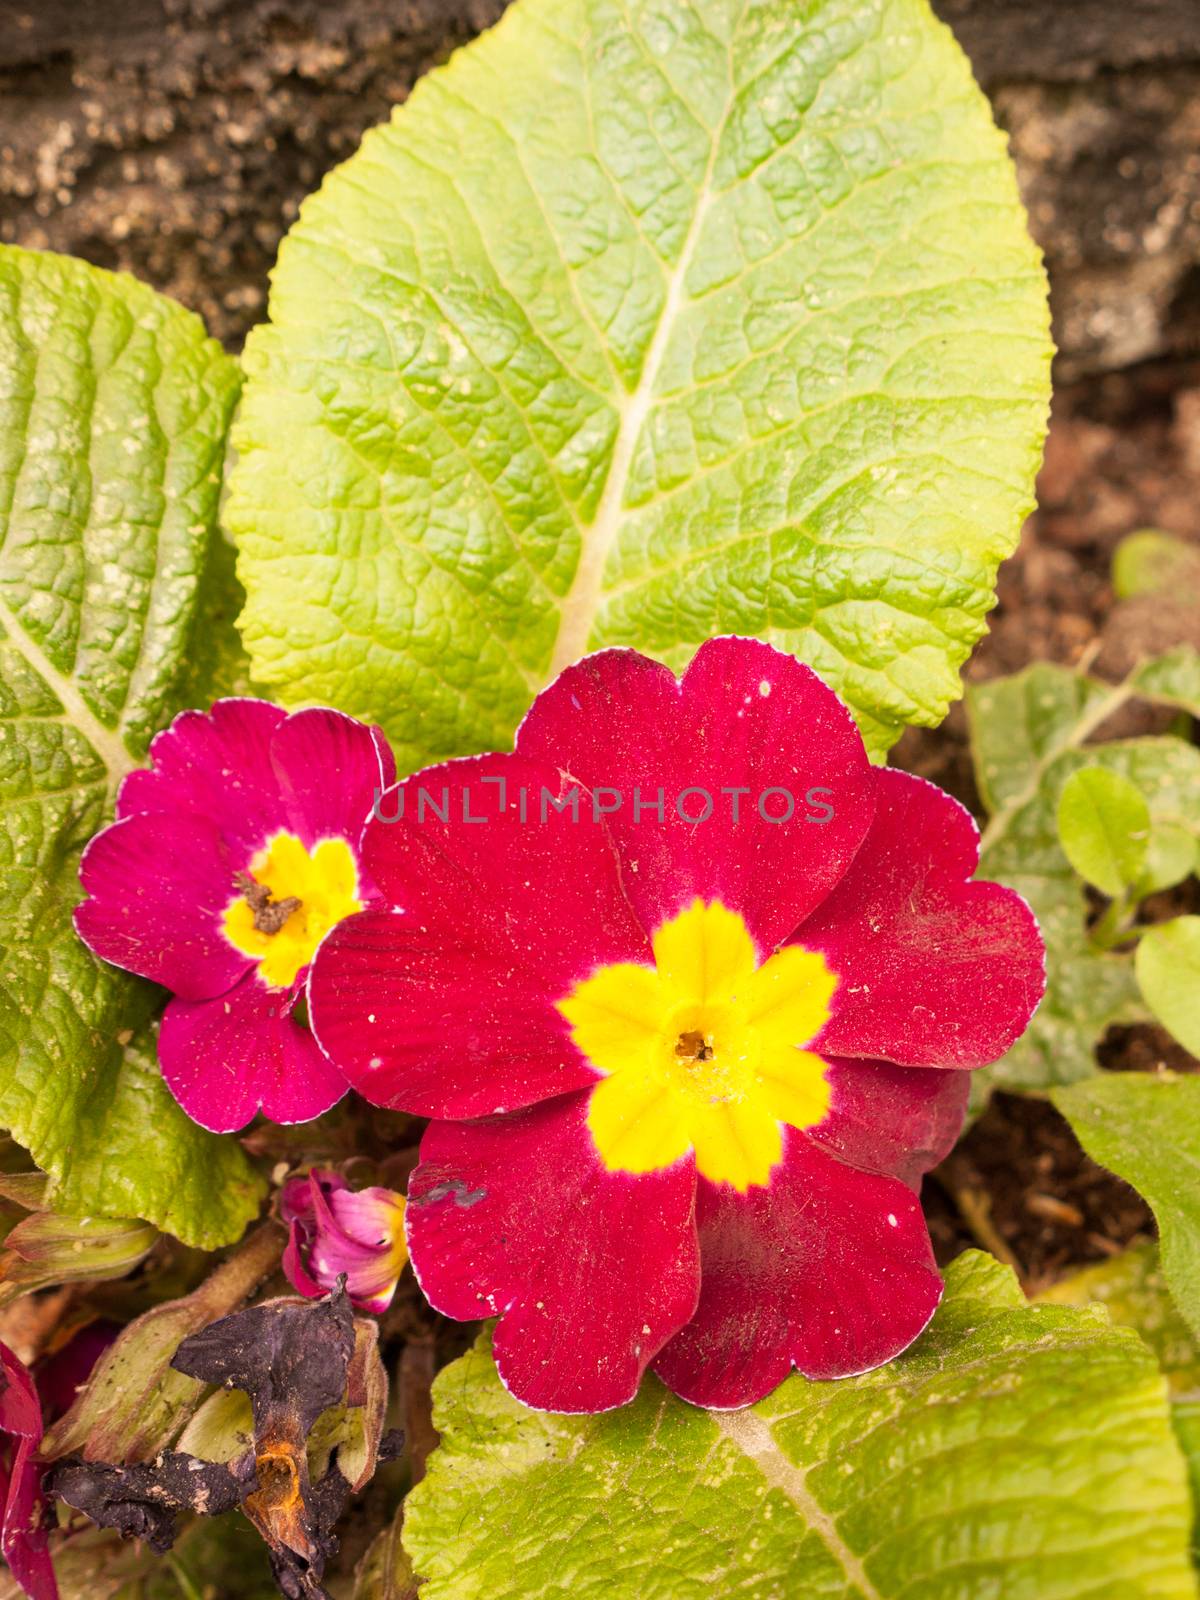 a close up shot of a purple and yellow flower head outside with big green leaves on the floor in front garden gravel soil wall pretty and neat color vibrant